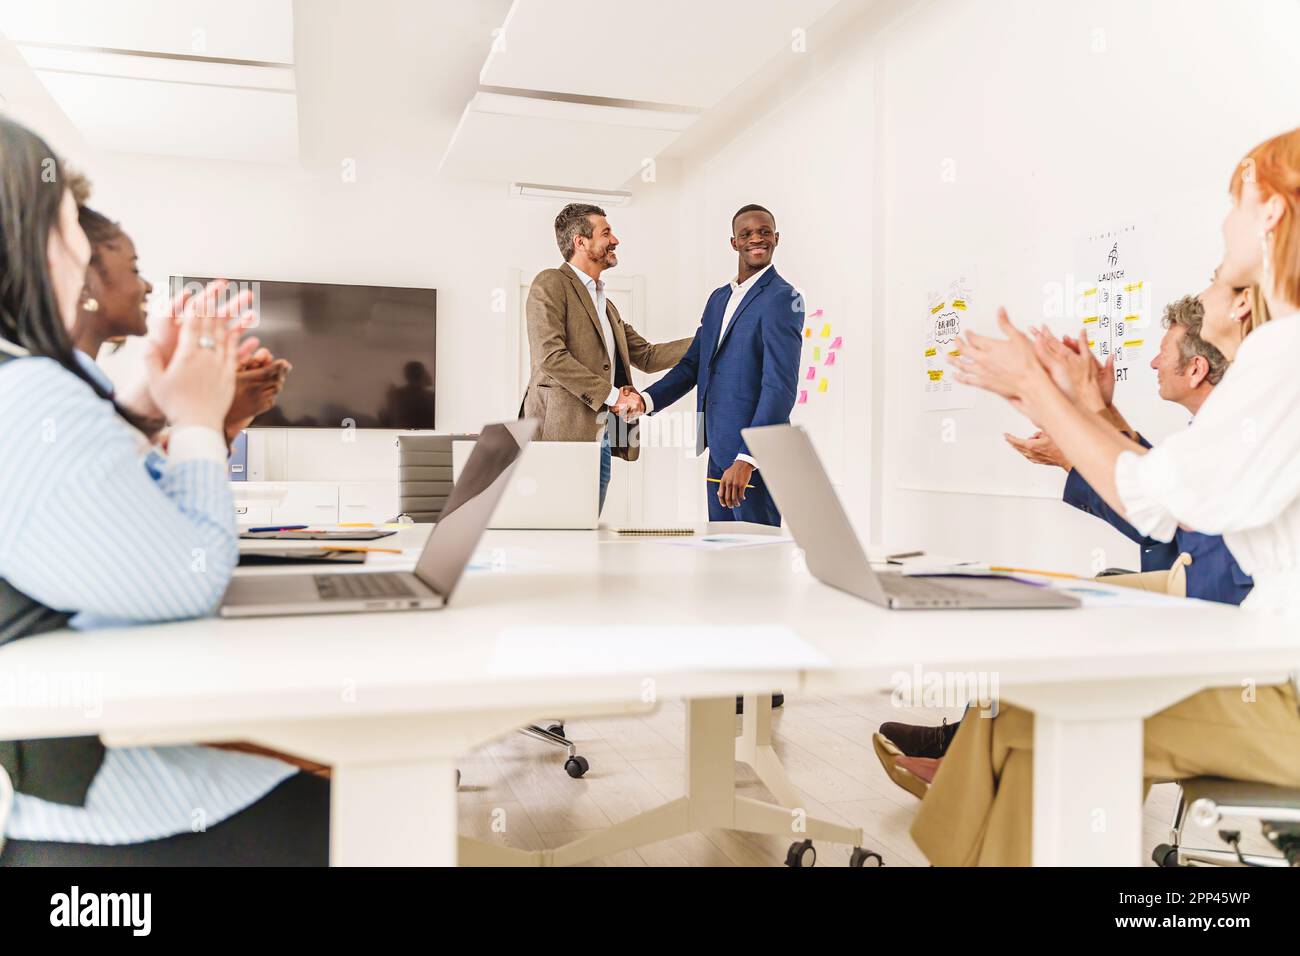 Wide shot of a diverse office with two people shaking hands at the center, while colleagues sitting at their desks applaud. Could signify a new collab Stock Photo